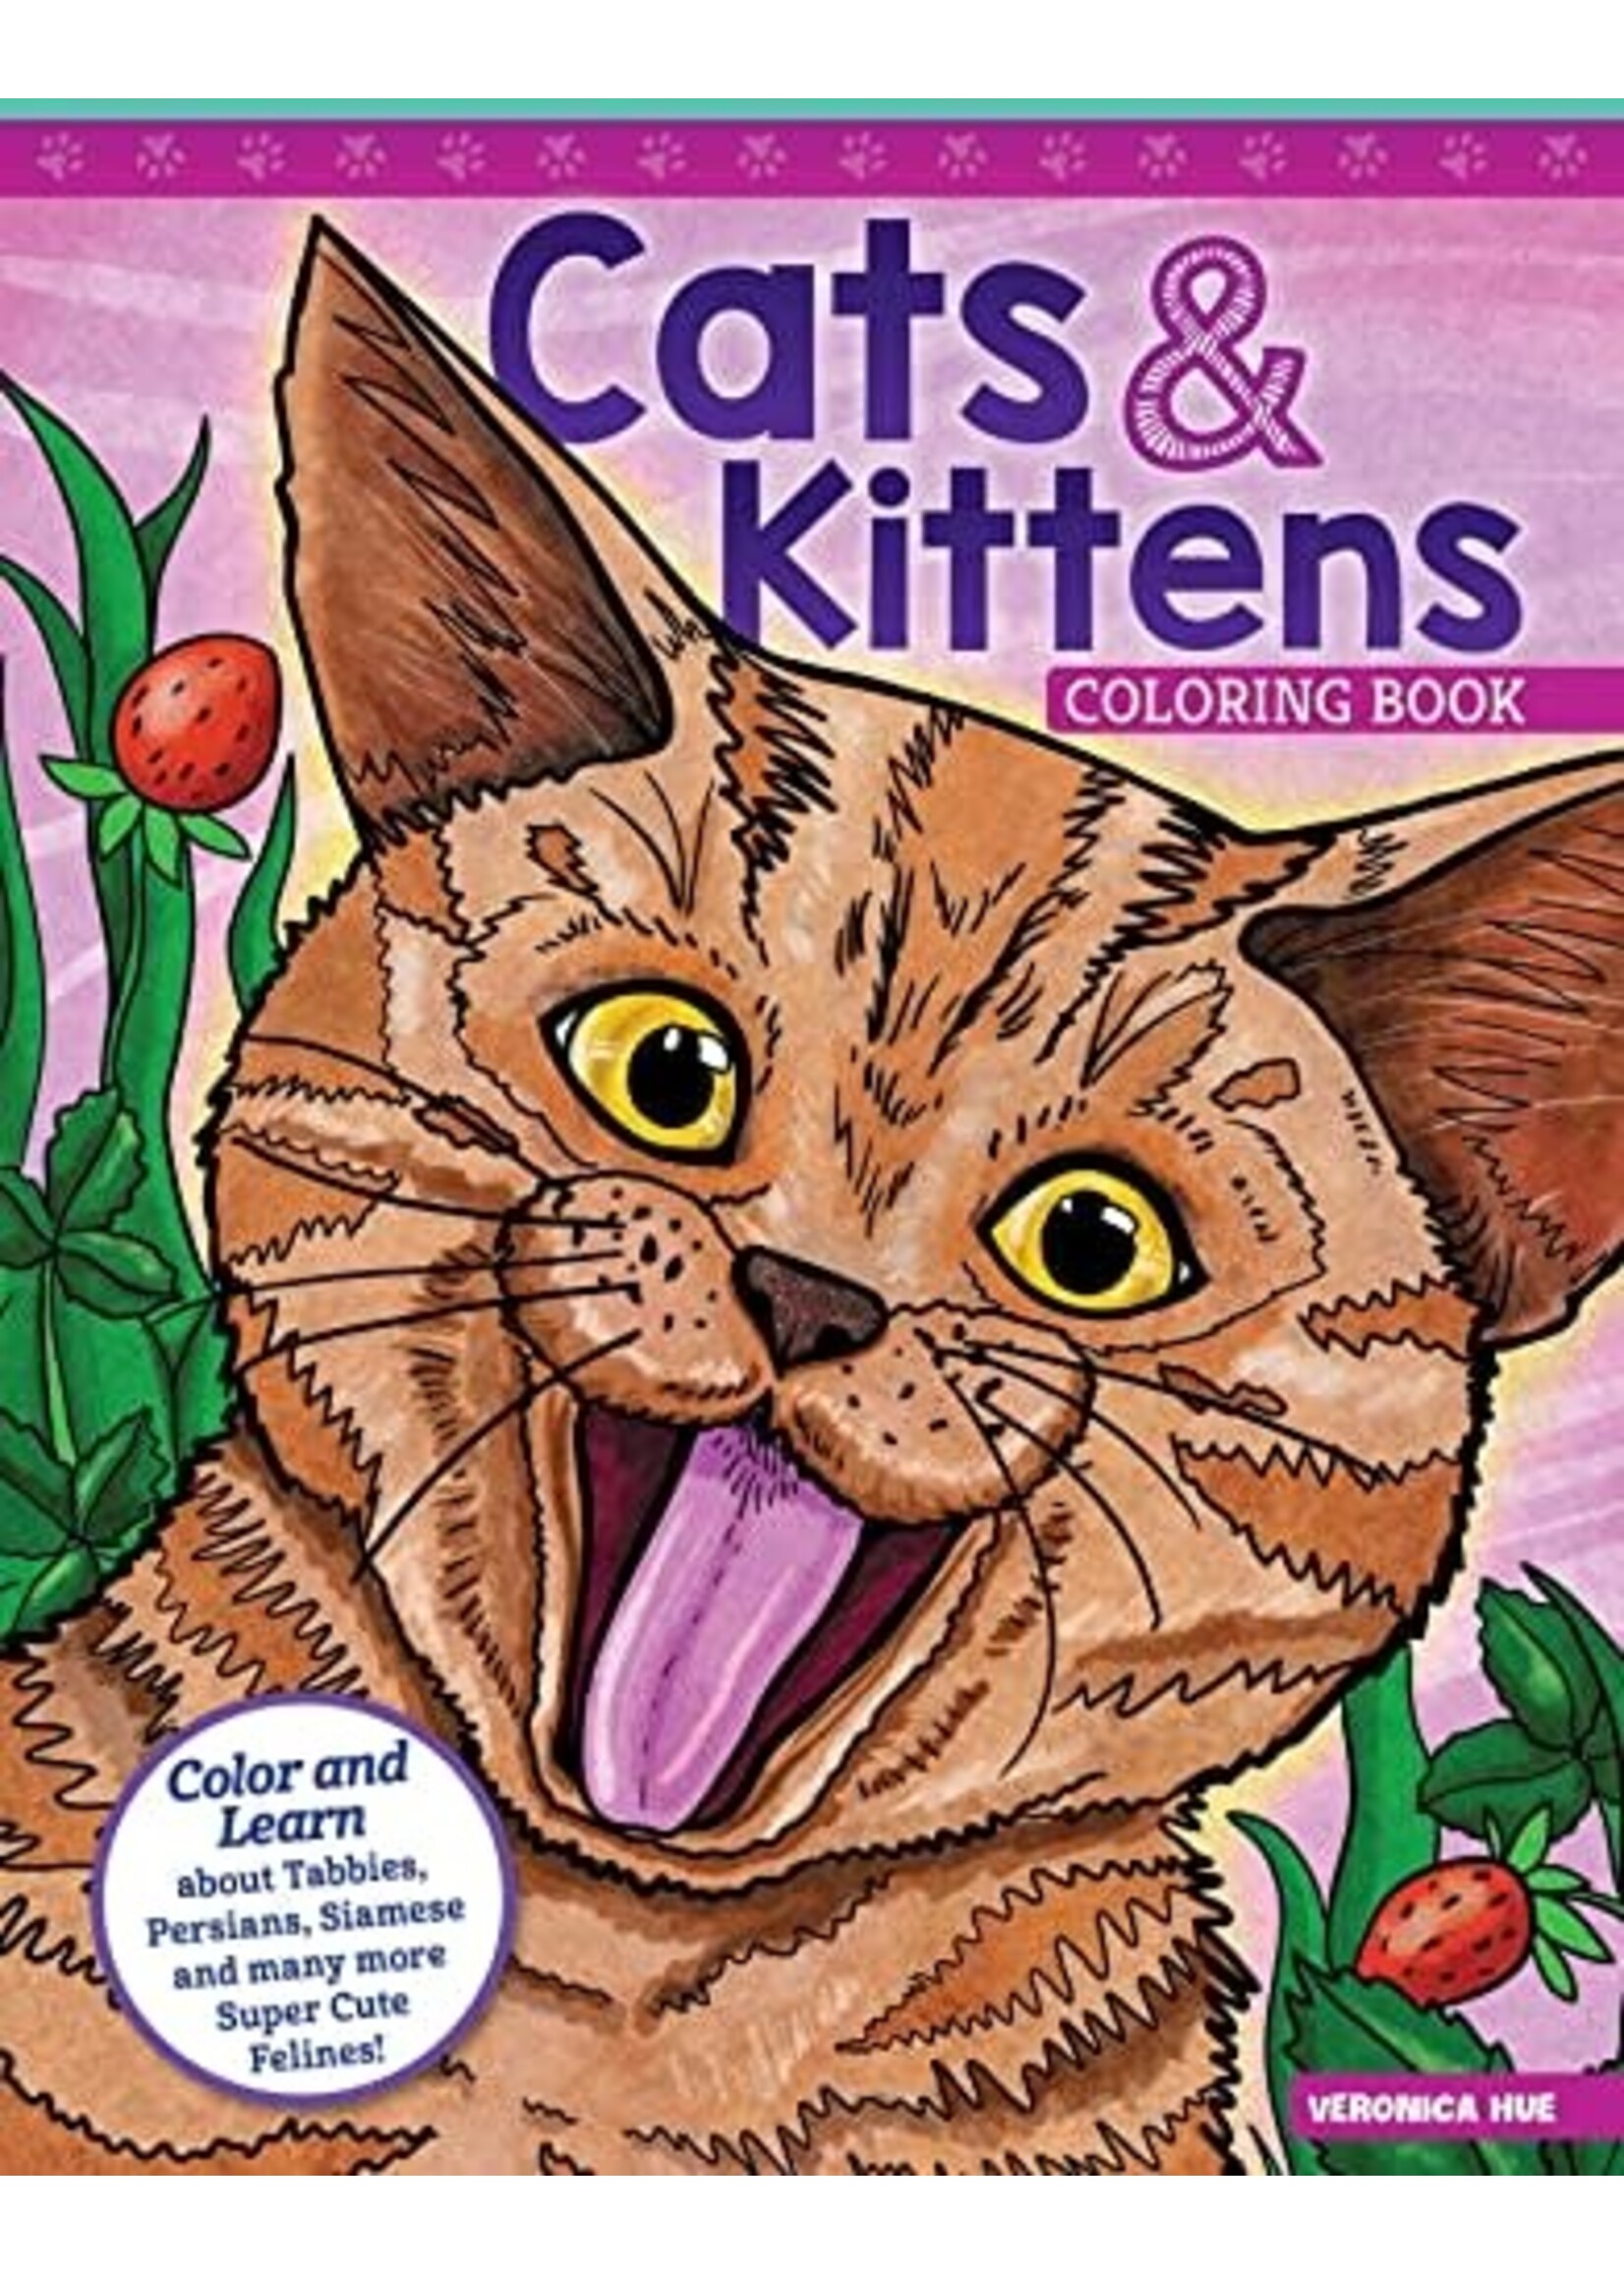 Cats and Kittens Coloring Book by Veronica Hue